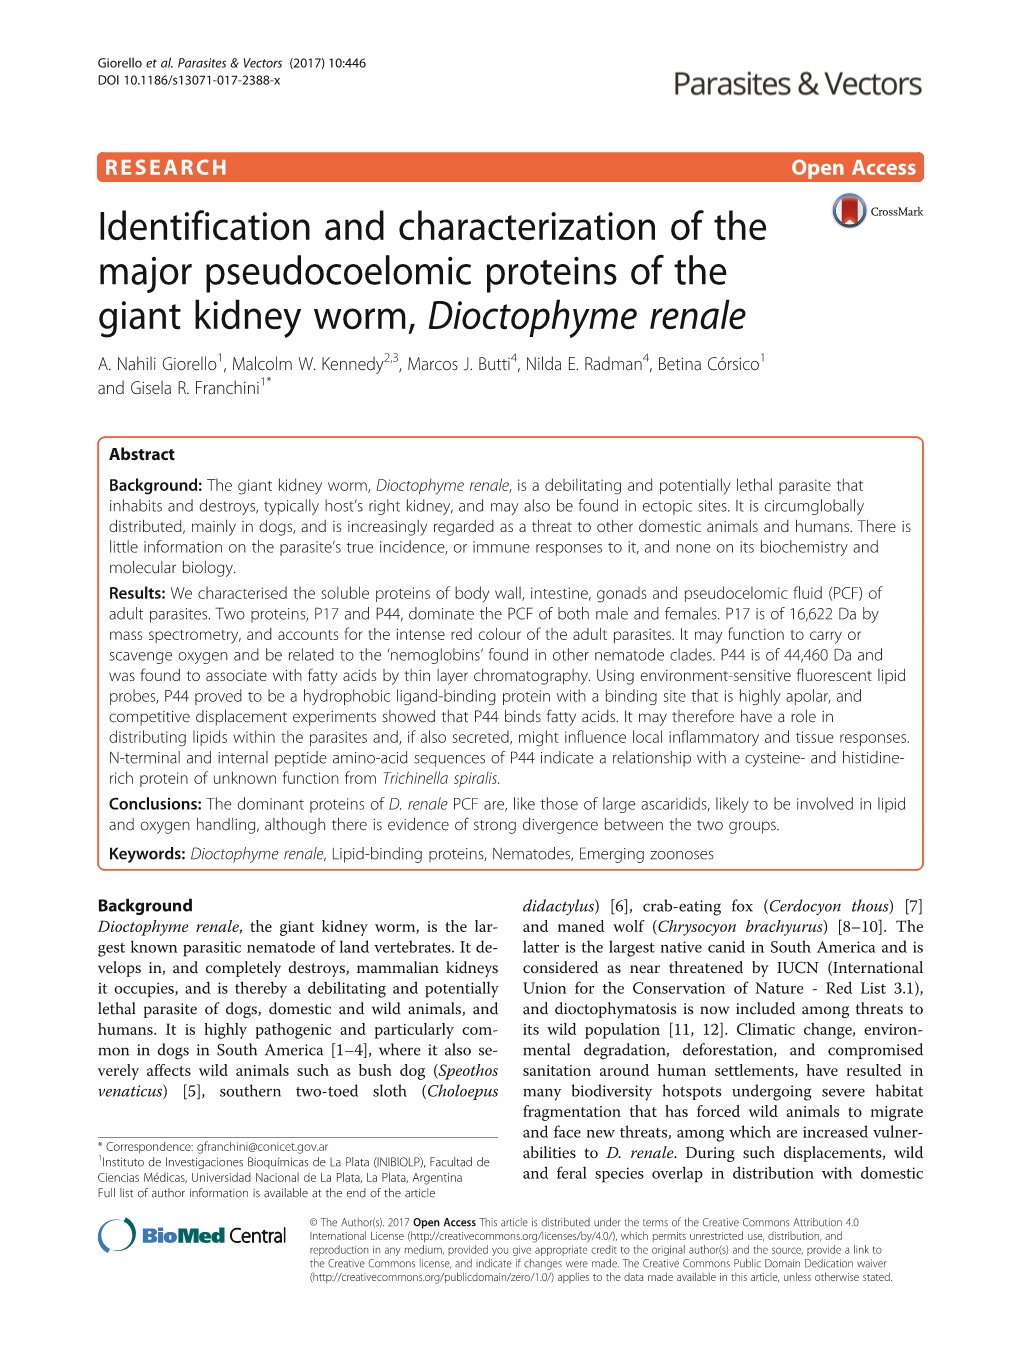 Identification and Characterization of the Major Pseudocoelomic Proteins of the Giant Kidney Worm, Dioctophyme Renale A